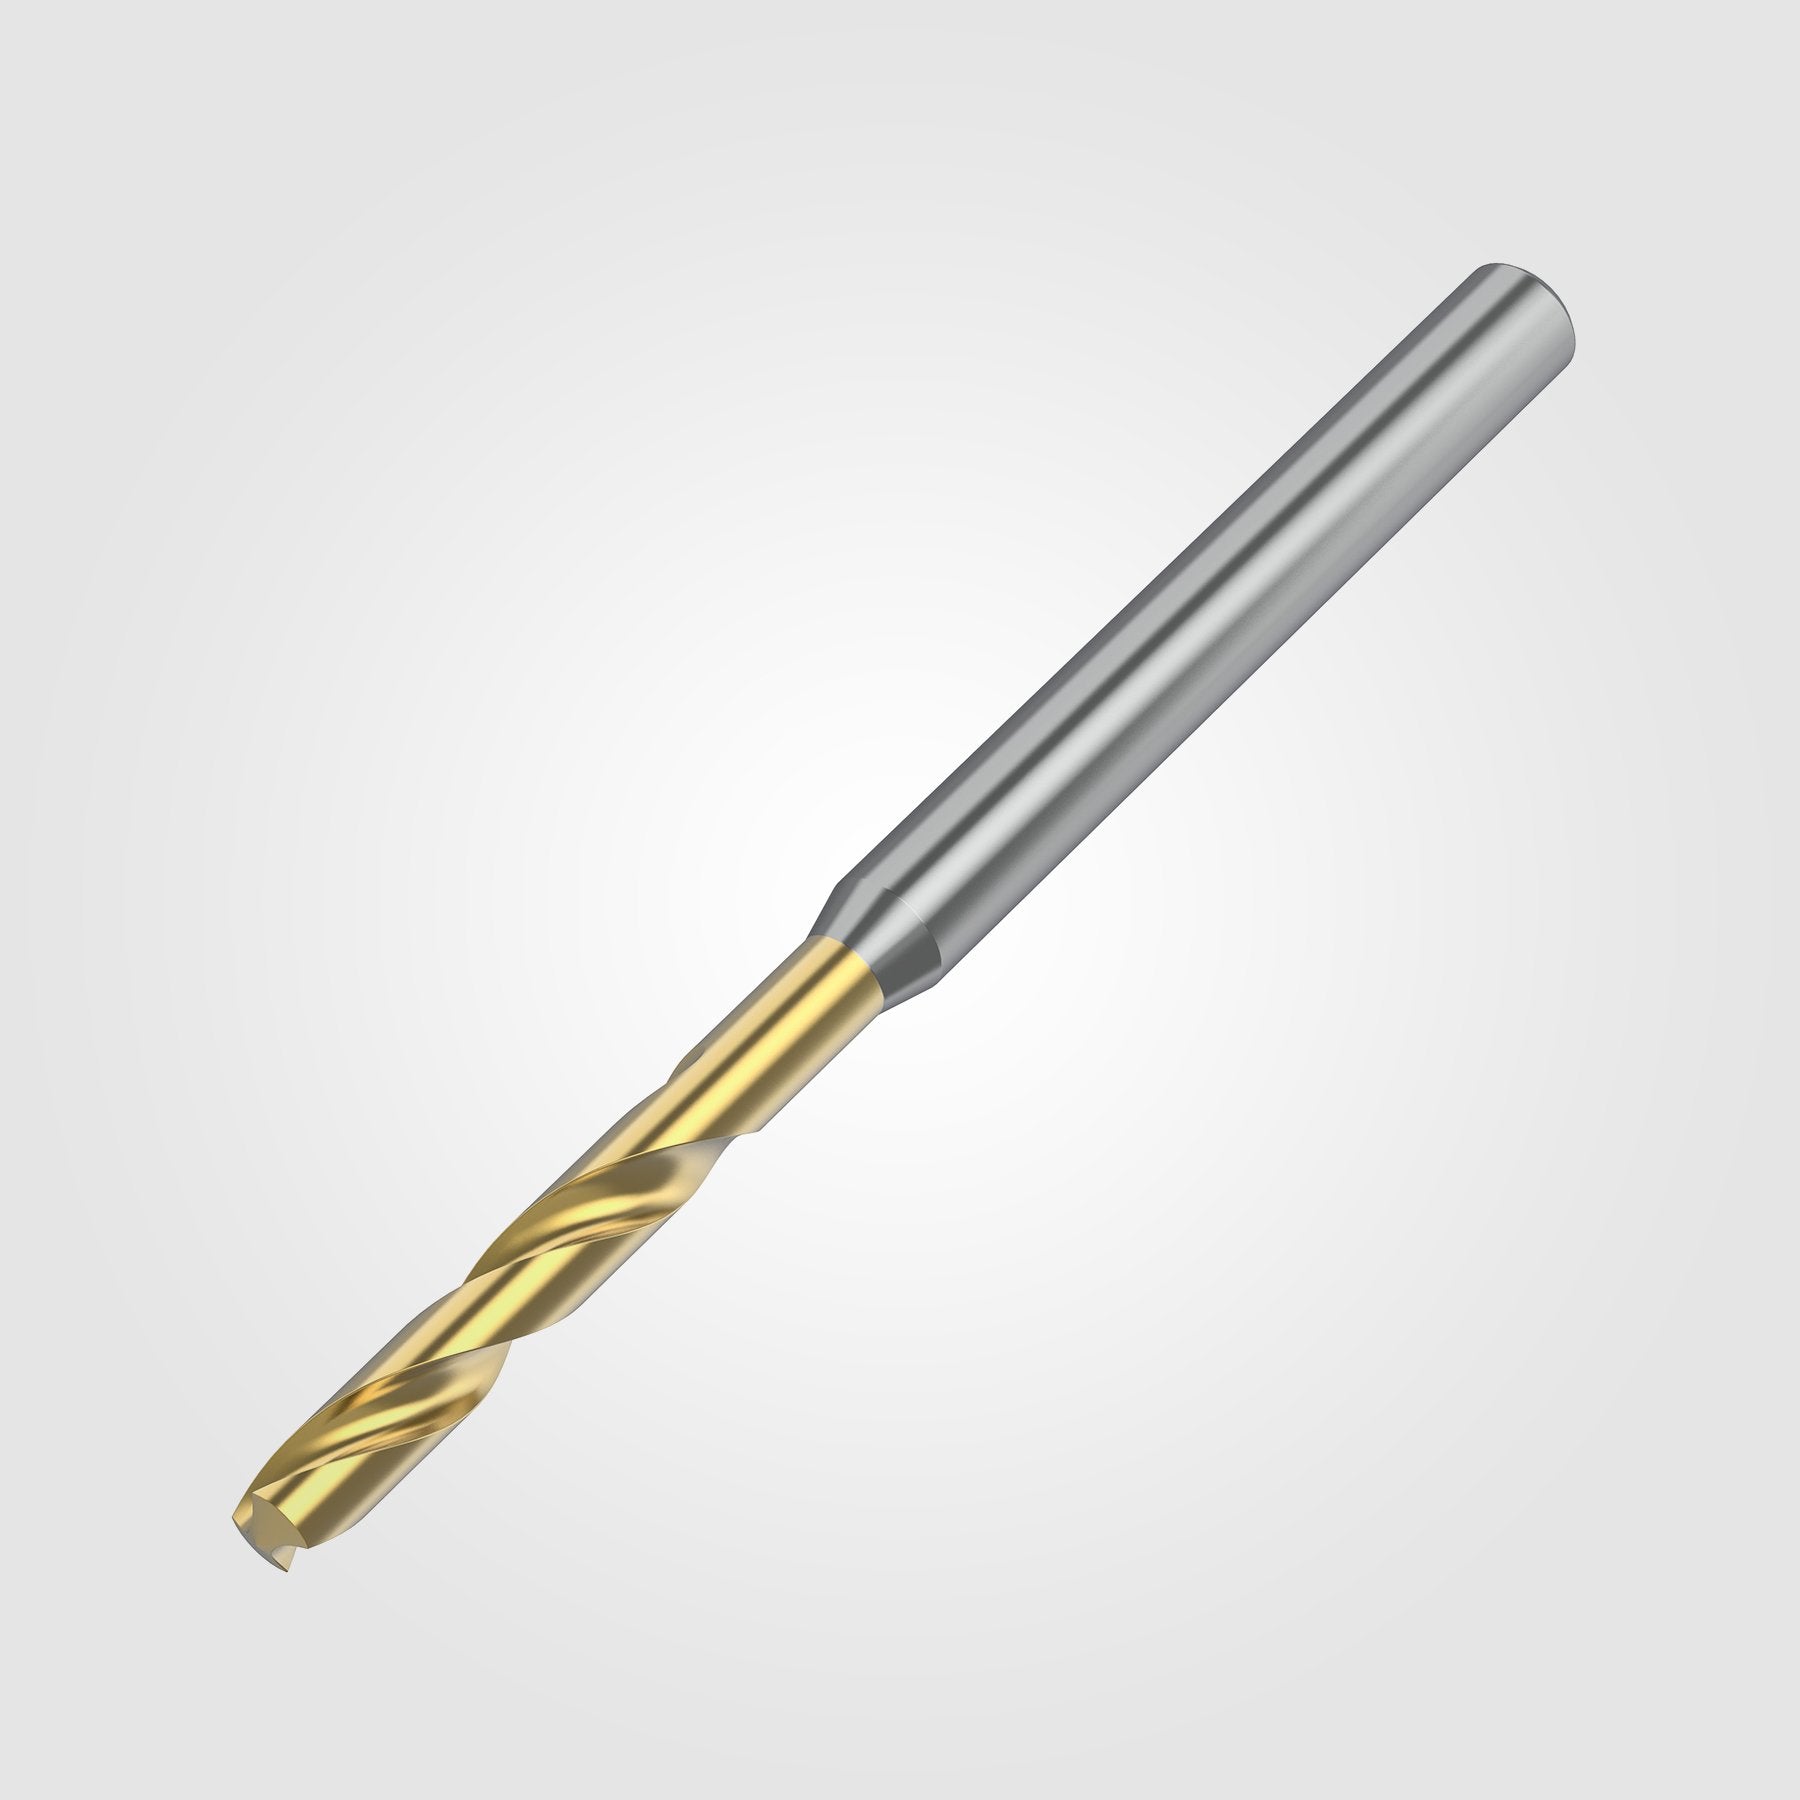 GOdrill (THROUGH COOLANT) | 6.3mm / .2480" / 3xD | SOLID CARBIDE DRILL | 4151151